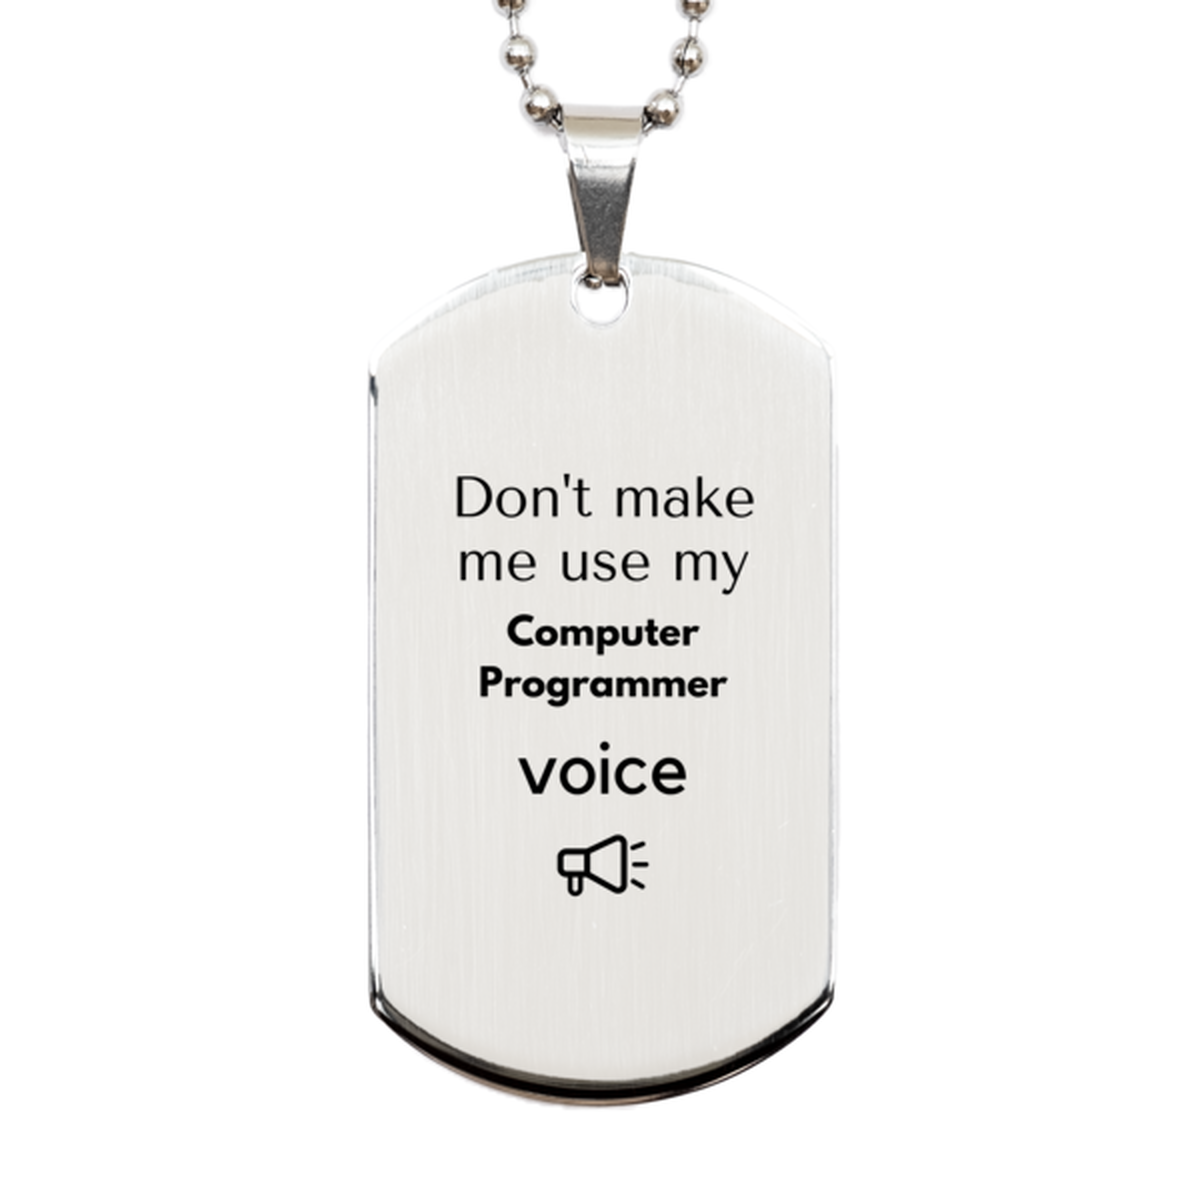 Don't make me use my Computer Programmer voice, Sarcasm Computer Programmer Gifts, Christmas Computer Programmer Silver Dog Tag Birthday Unique Gifts For Computer Programmer Coworkers, Men, Women, Colleague, Friends